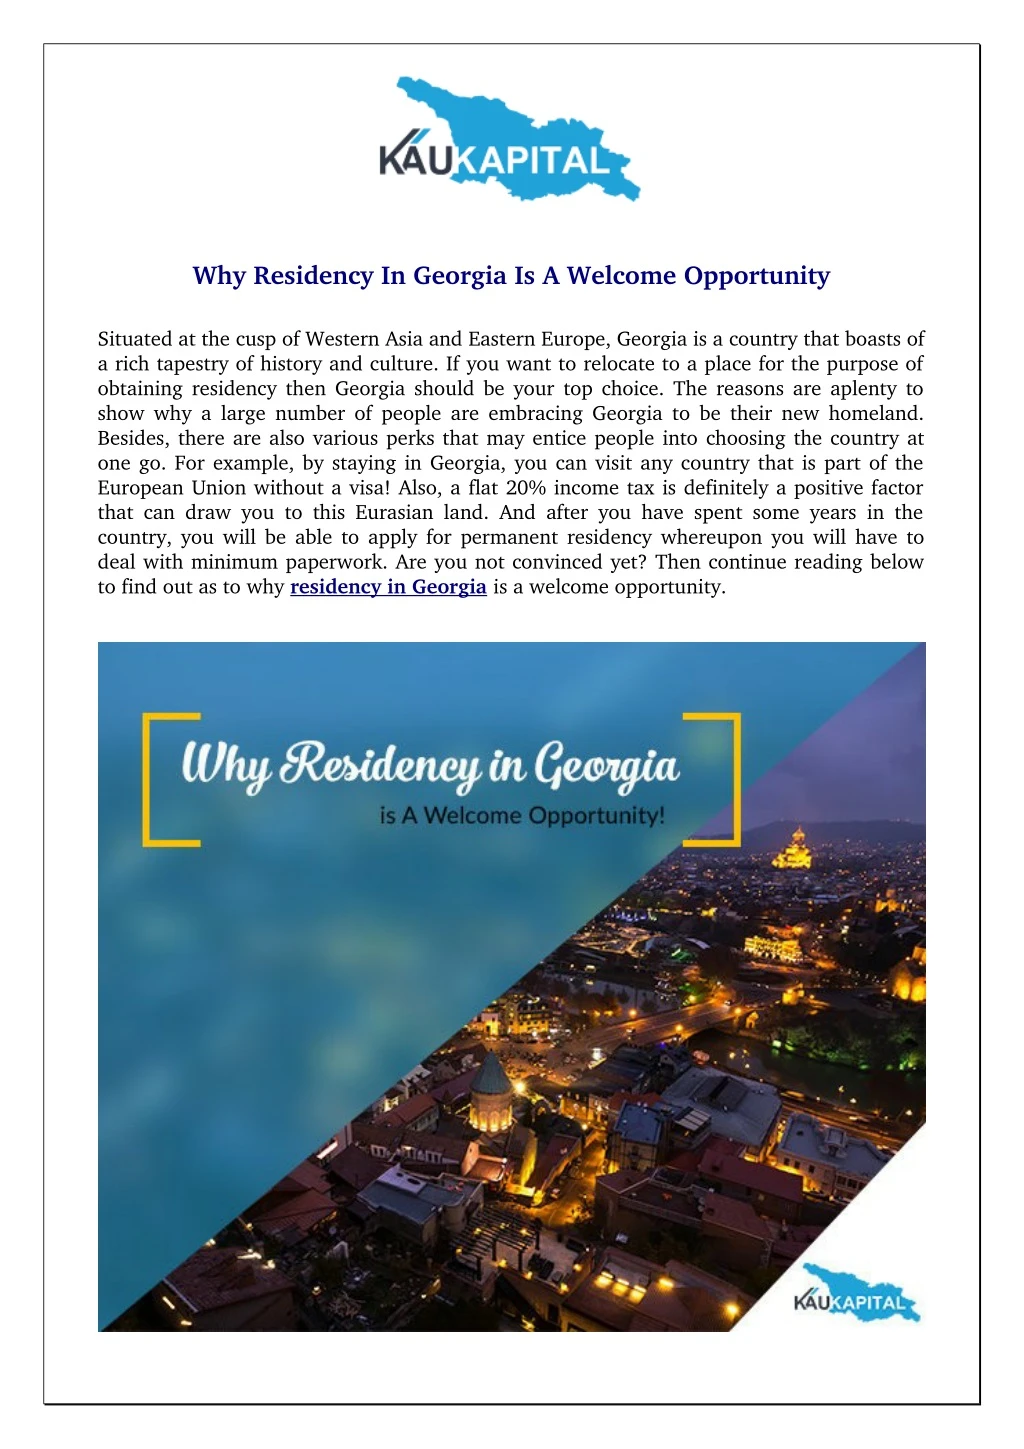 why residency in georgia is a welcome opportunity